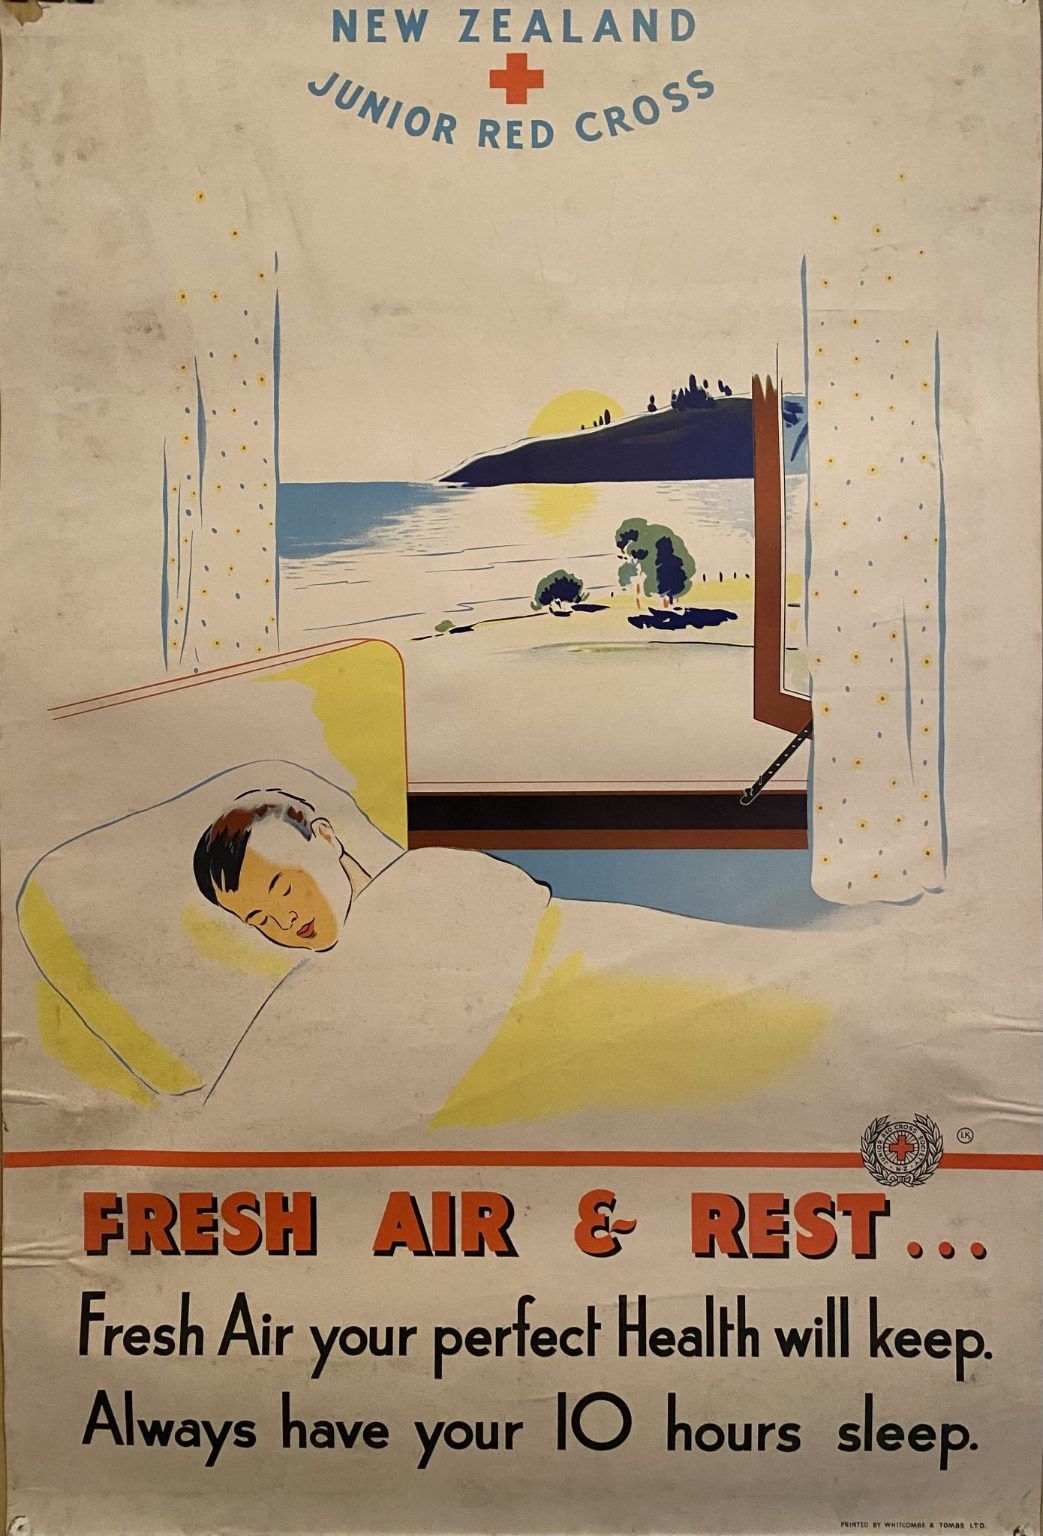 VINTAGE POSTER: New Zealand Junior Red Cross / Fresh Air & Rest 1950s